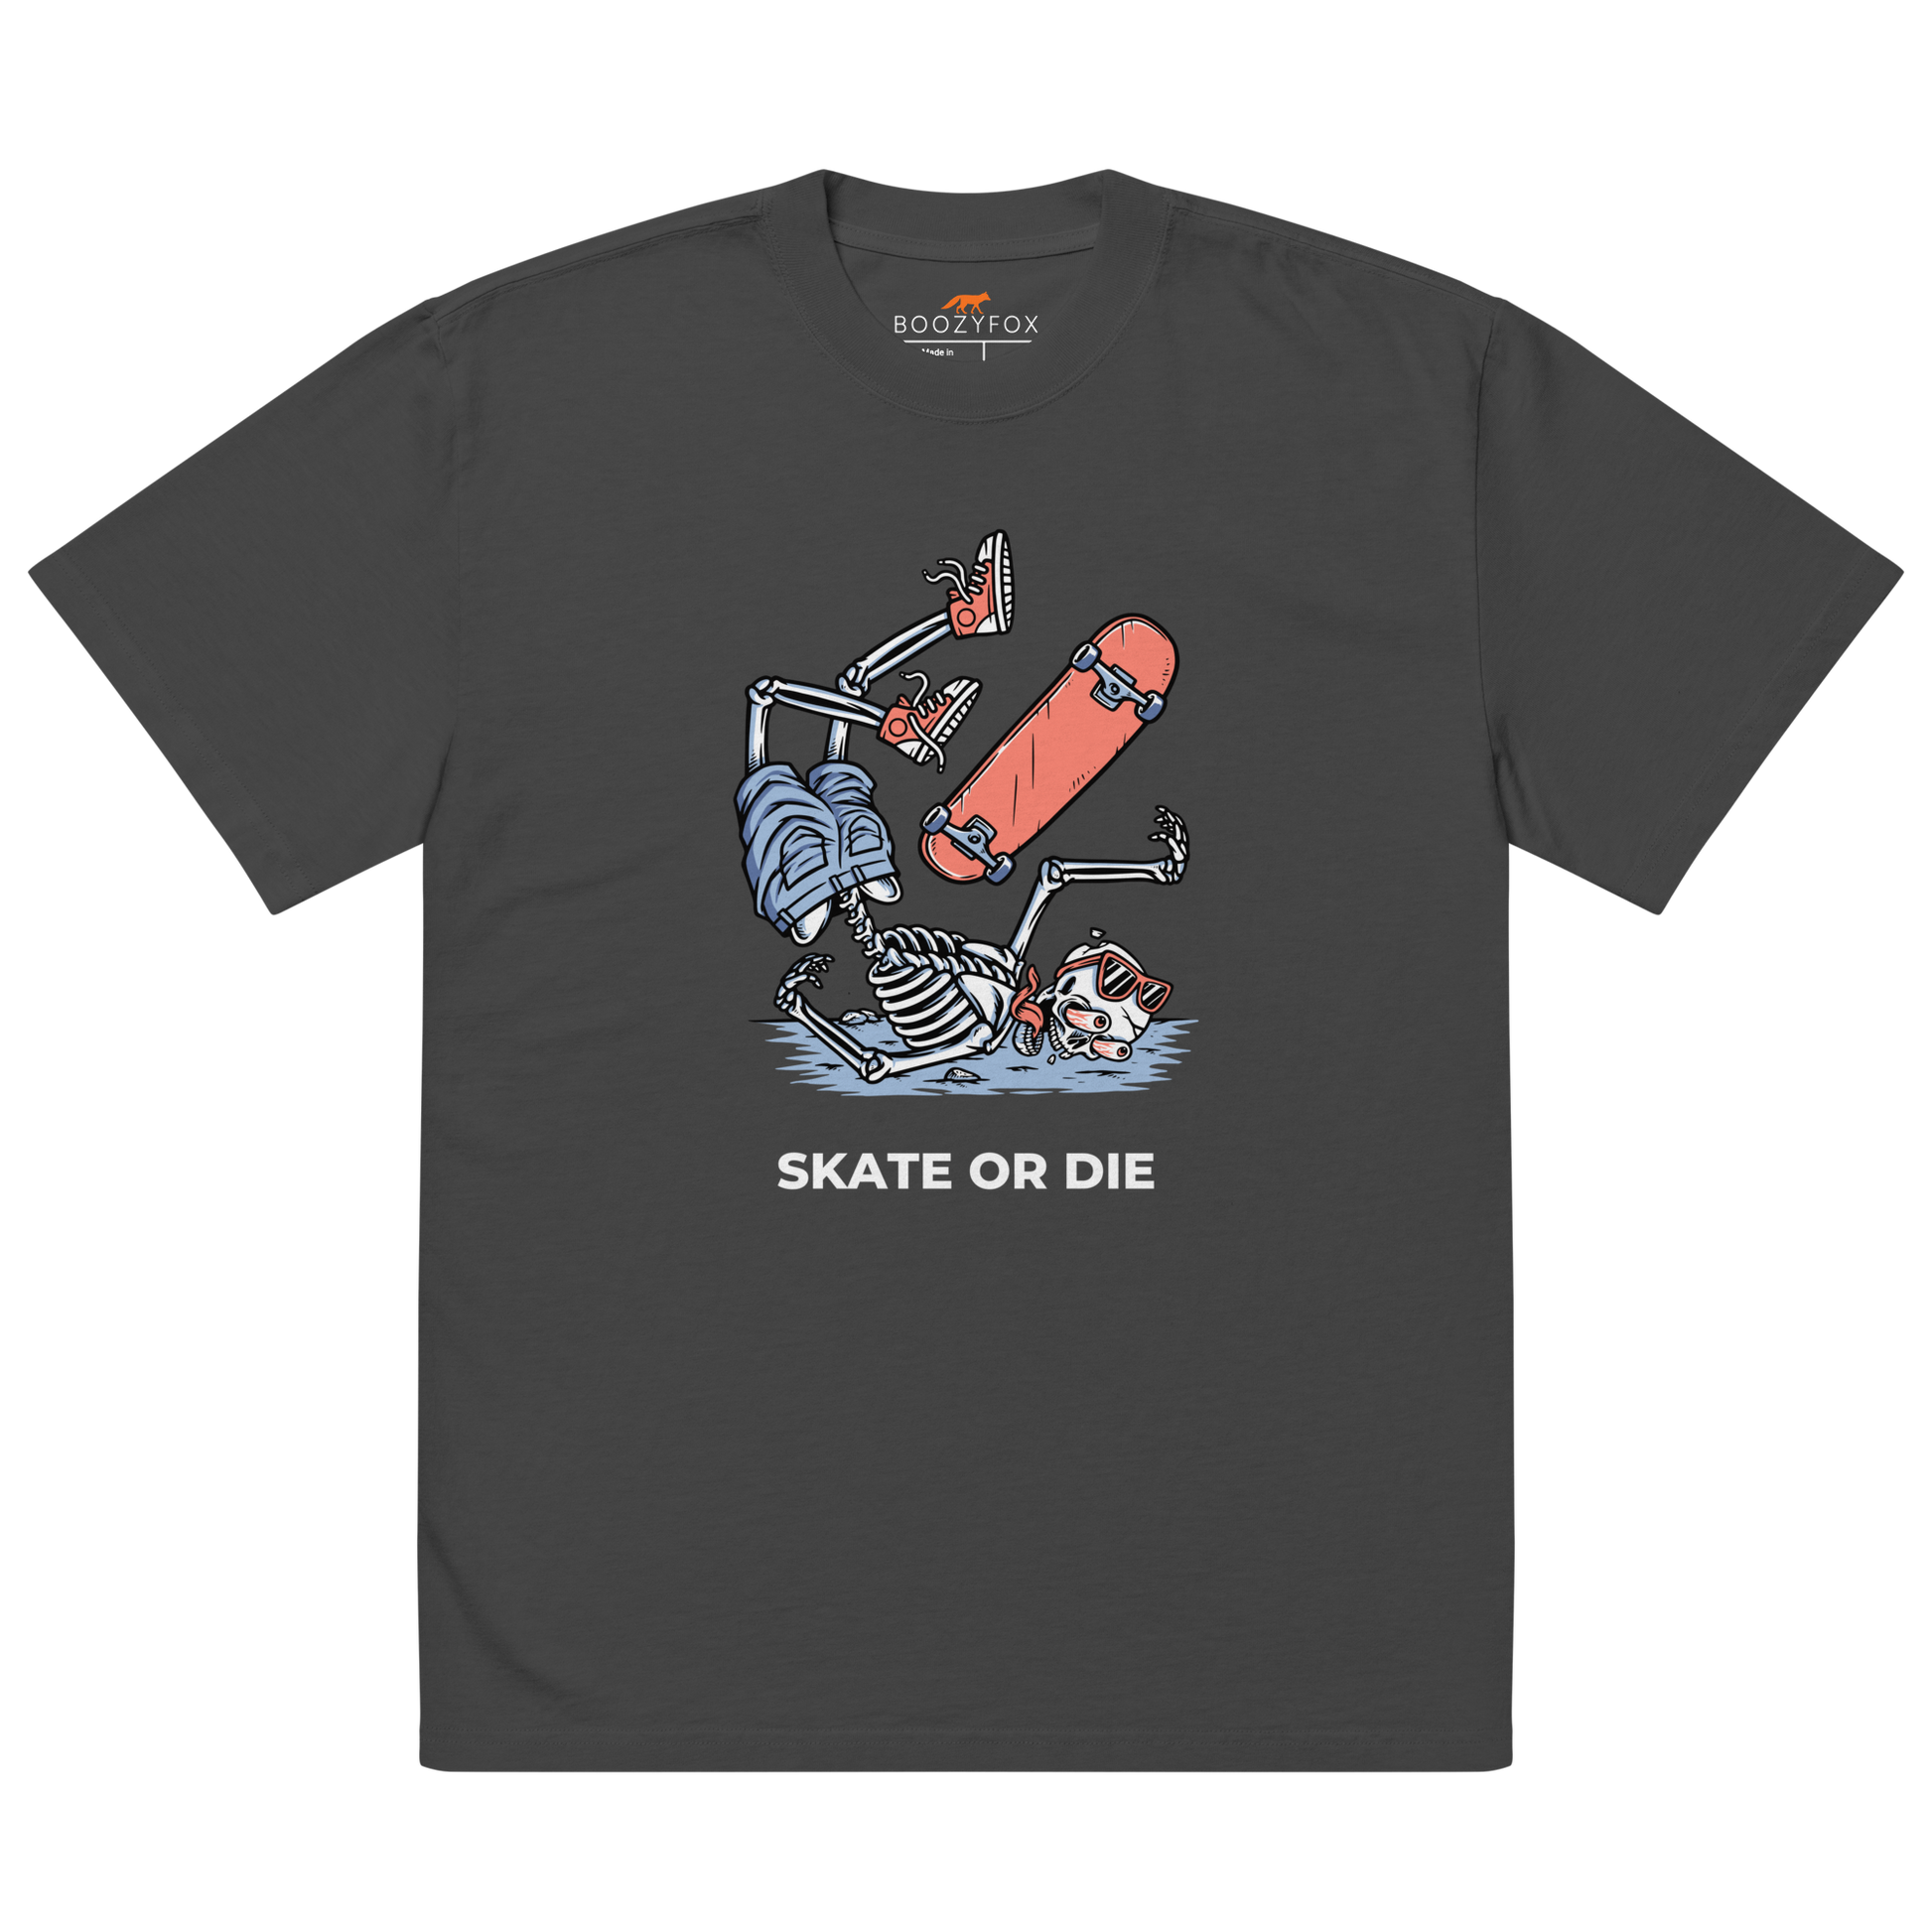 Faded Black Skate or Die Oversized T-Shirt featuring a fearless Skeleton Falling While Skateboarding graphic on the chest - Cool Graphic Skeleton Oversized Tees - Boozy Fox